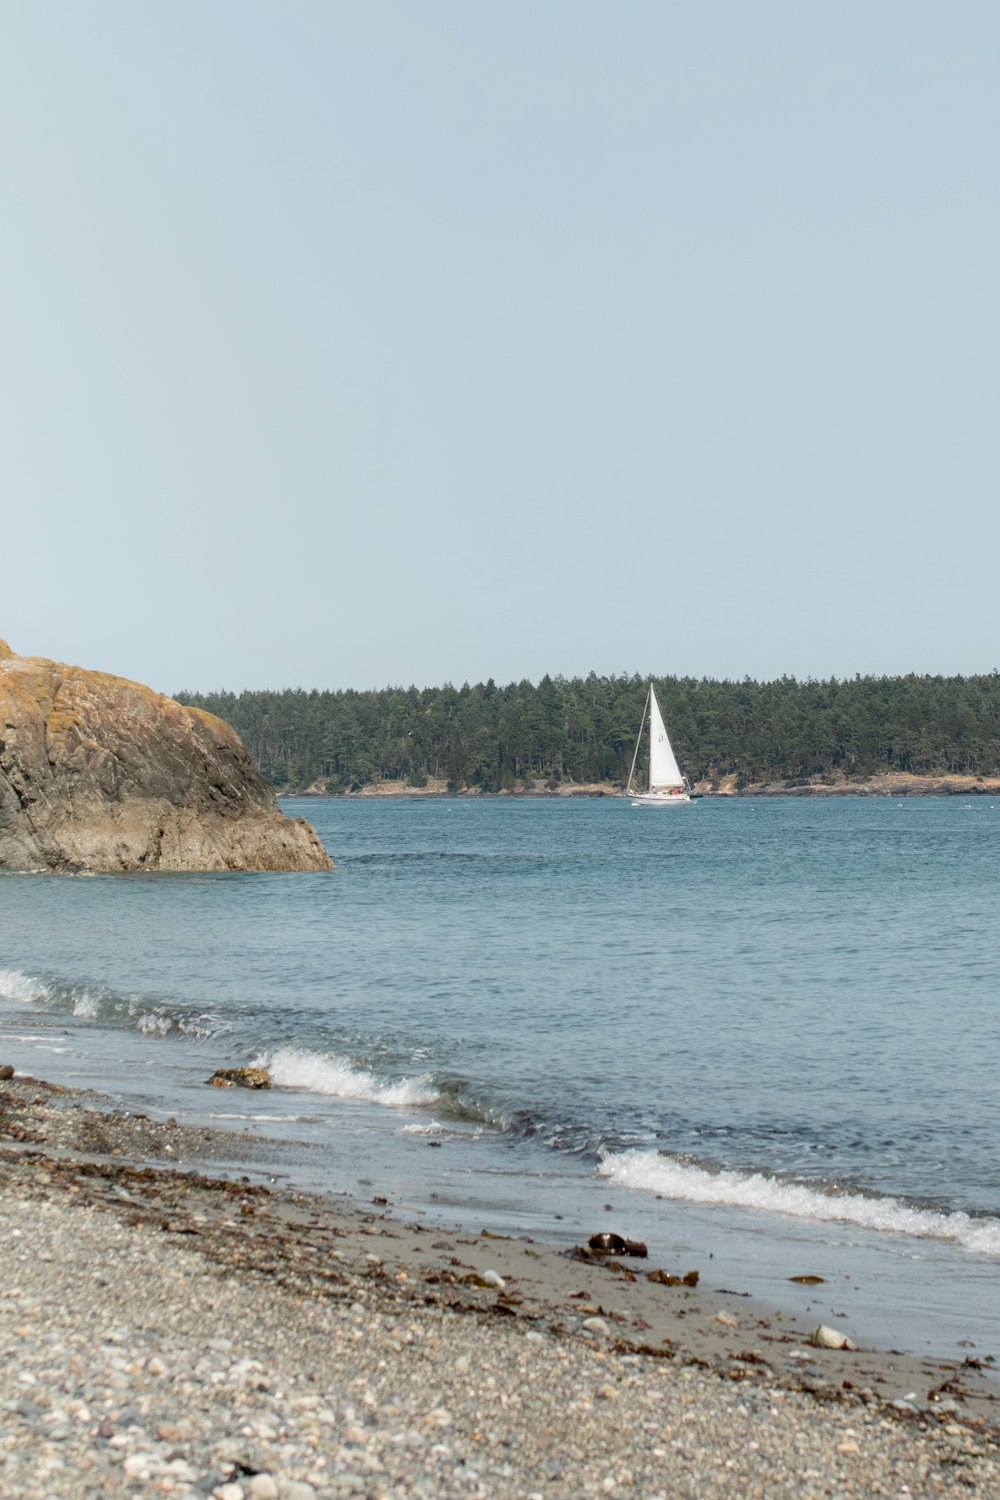 a sailboat on the water near a rocky shore